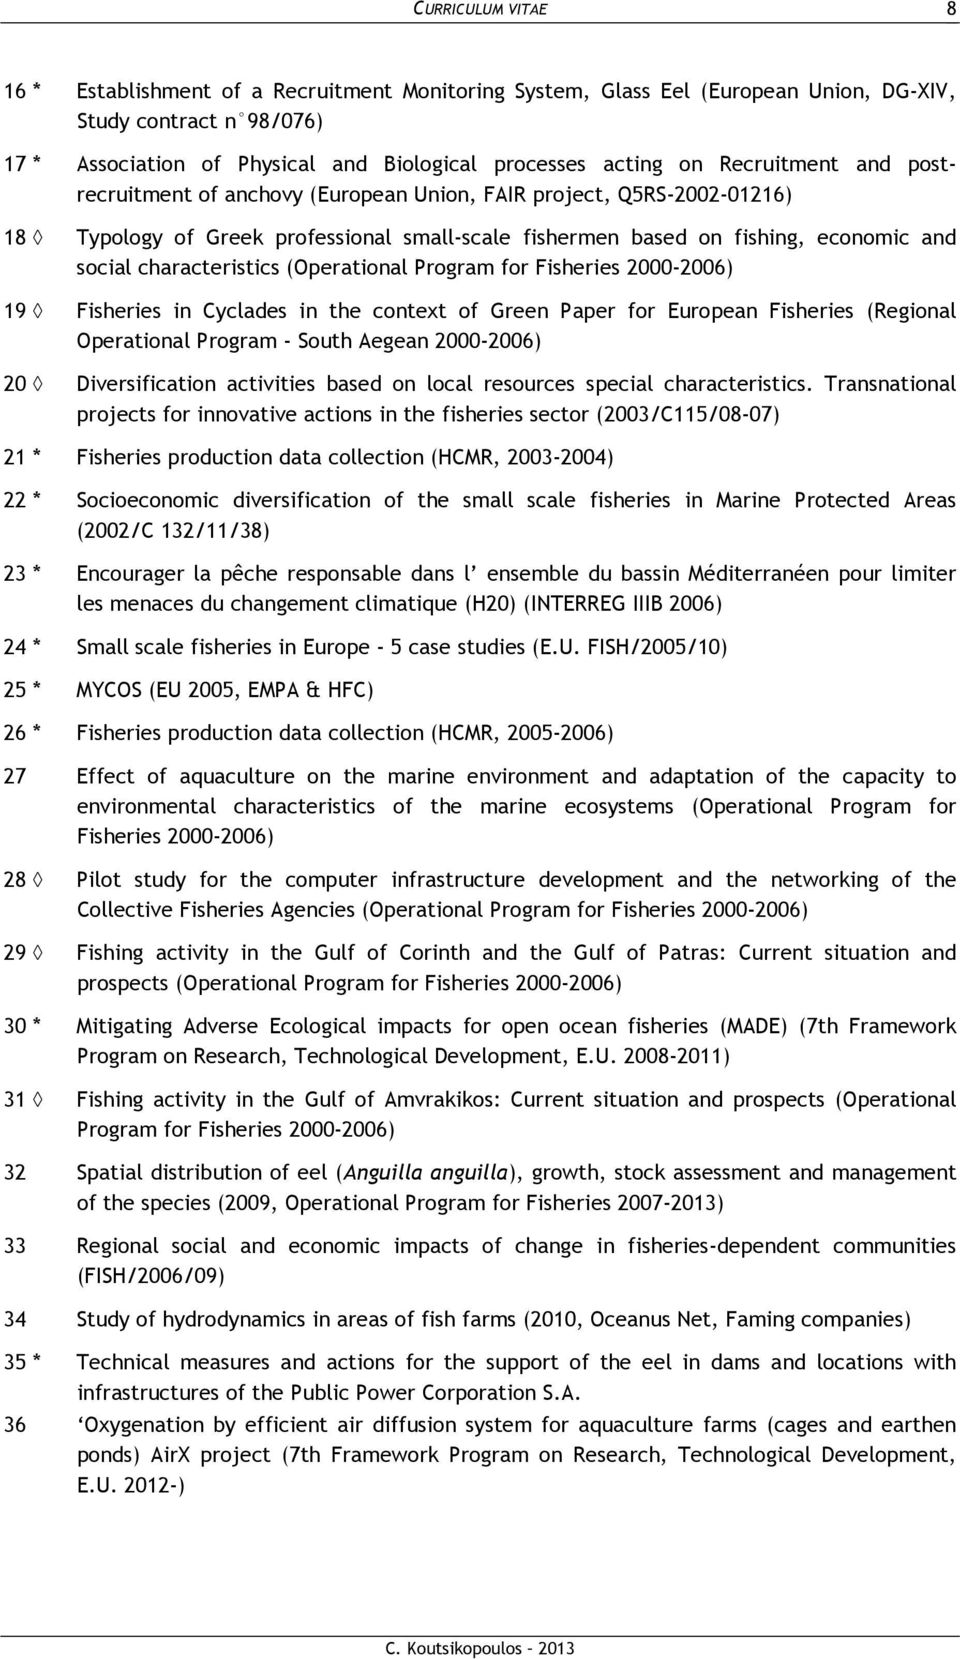 Program for Fisheries 2000-2006) 19 Fisheries in Cyclades in the context of Green Paper for European Fisheries (Regional Operational Program - South Aegean 2000-2006) 20 Diversification activities